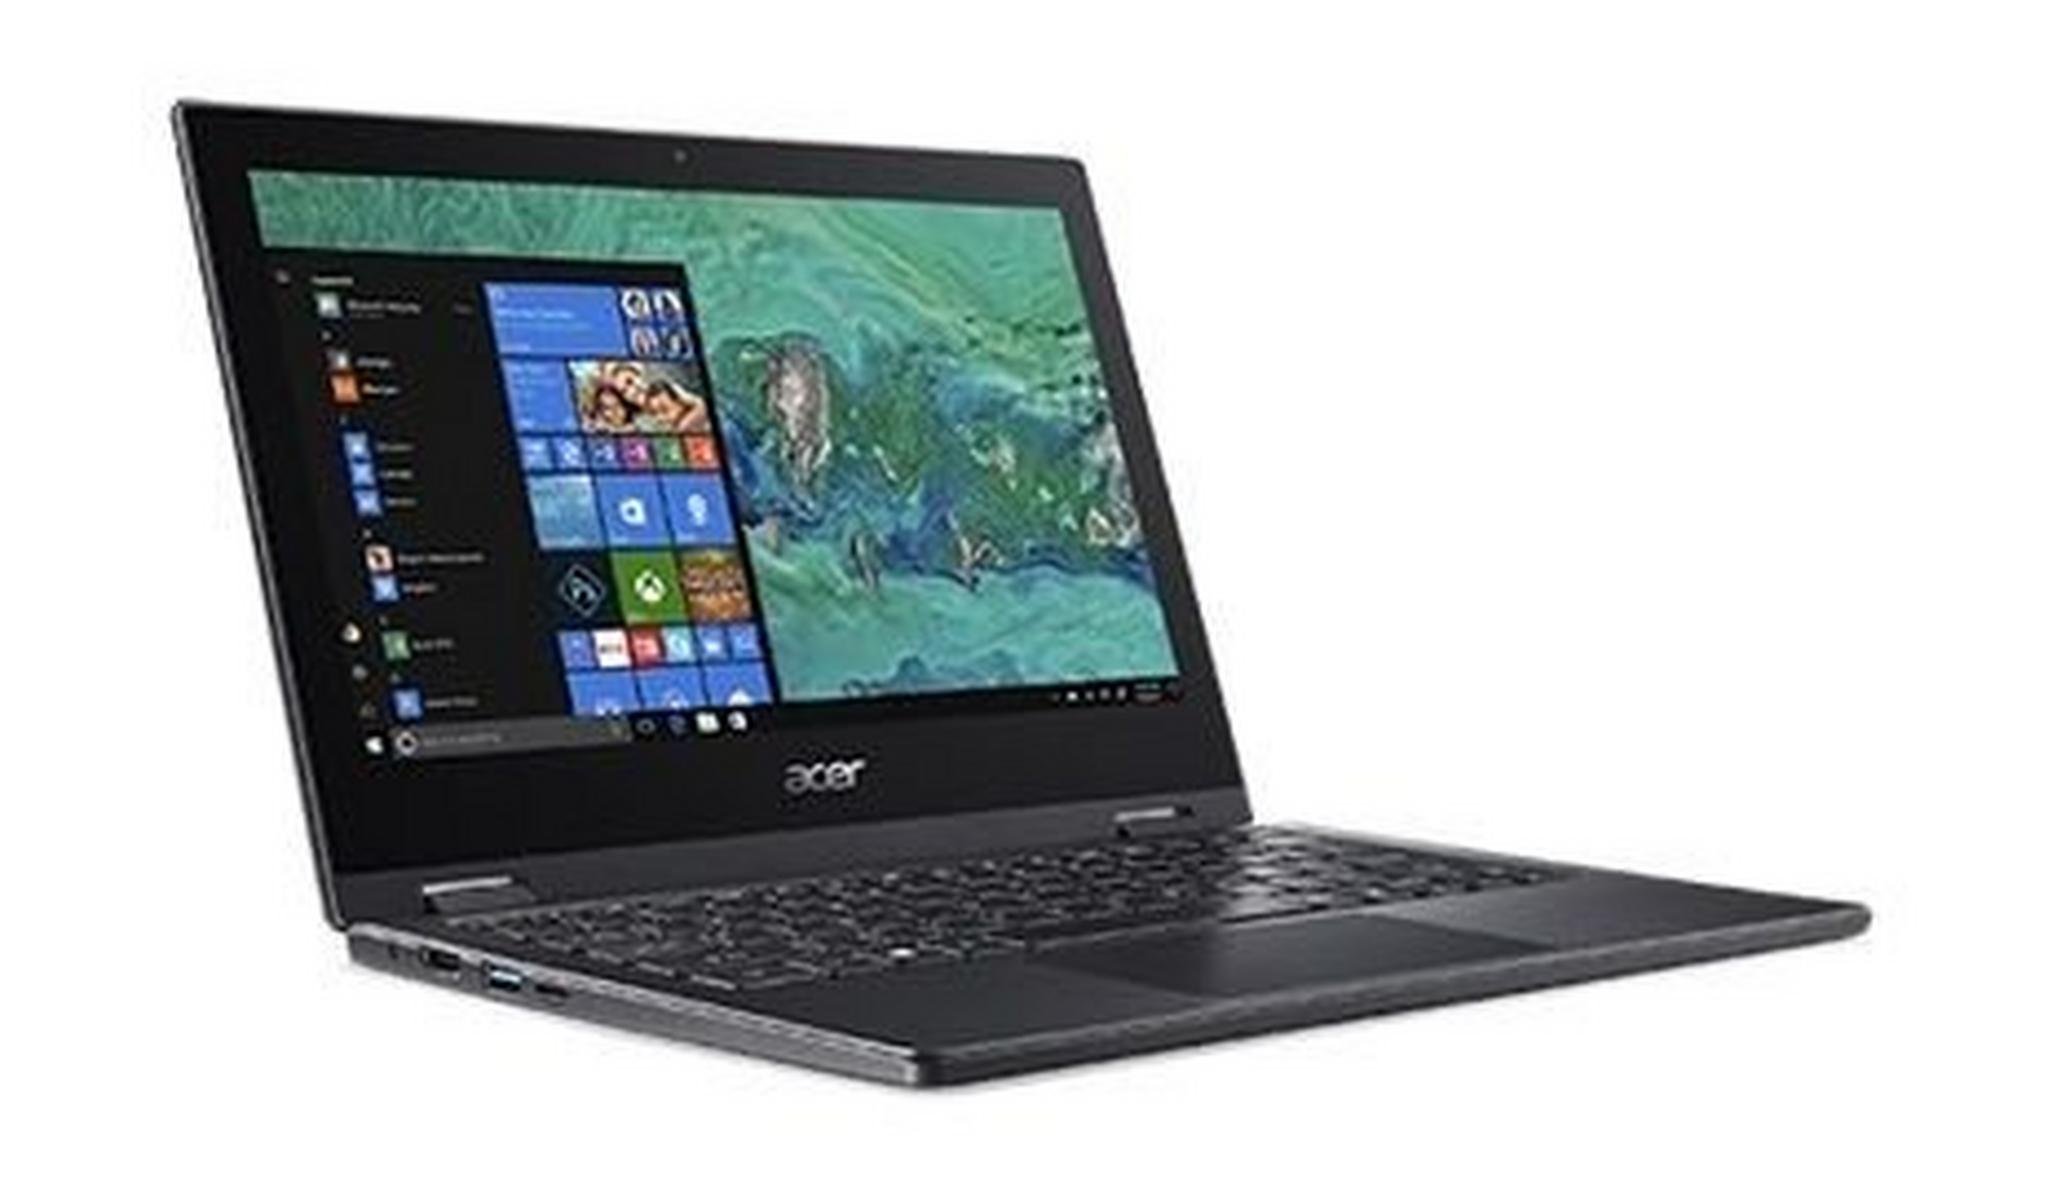 Acer Spin 1 Pentium Silver N5000 4GB RAM 500GB HDD 11.6 inch Touchscreen Convertible Laptop - Black